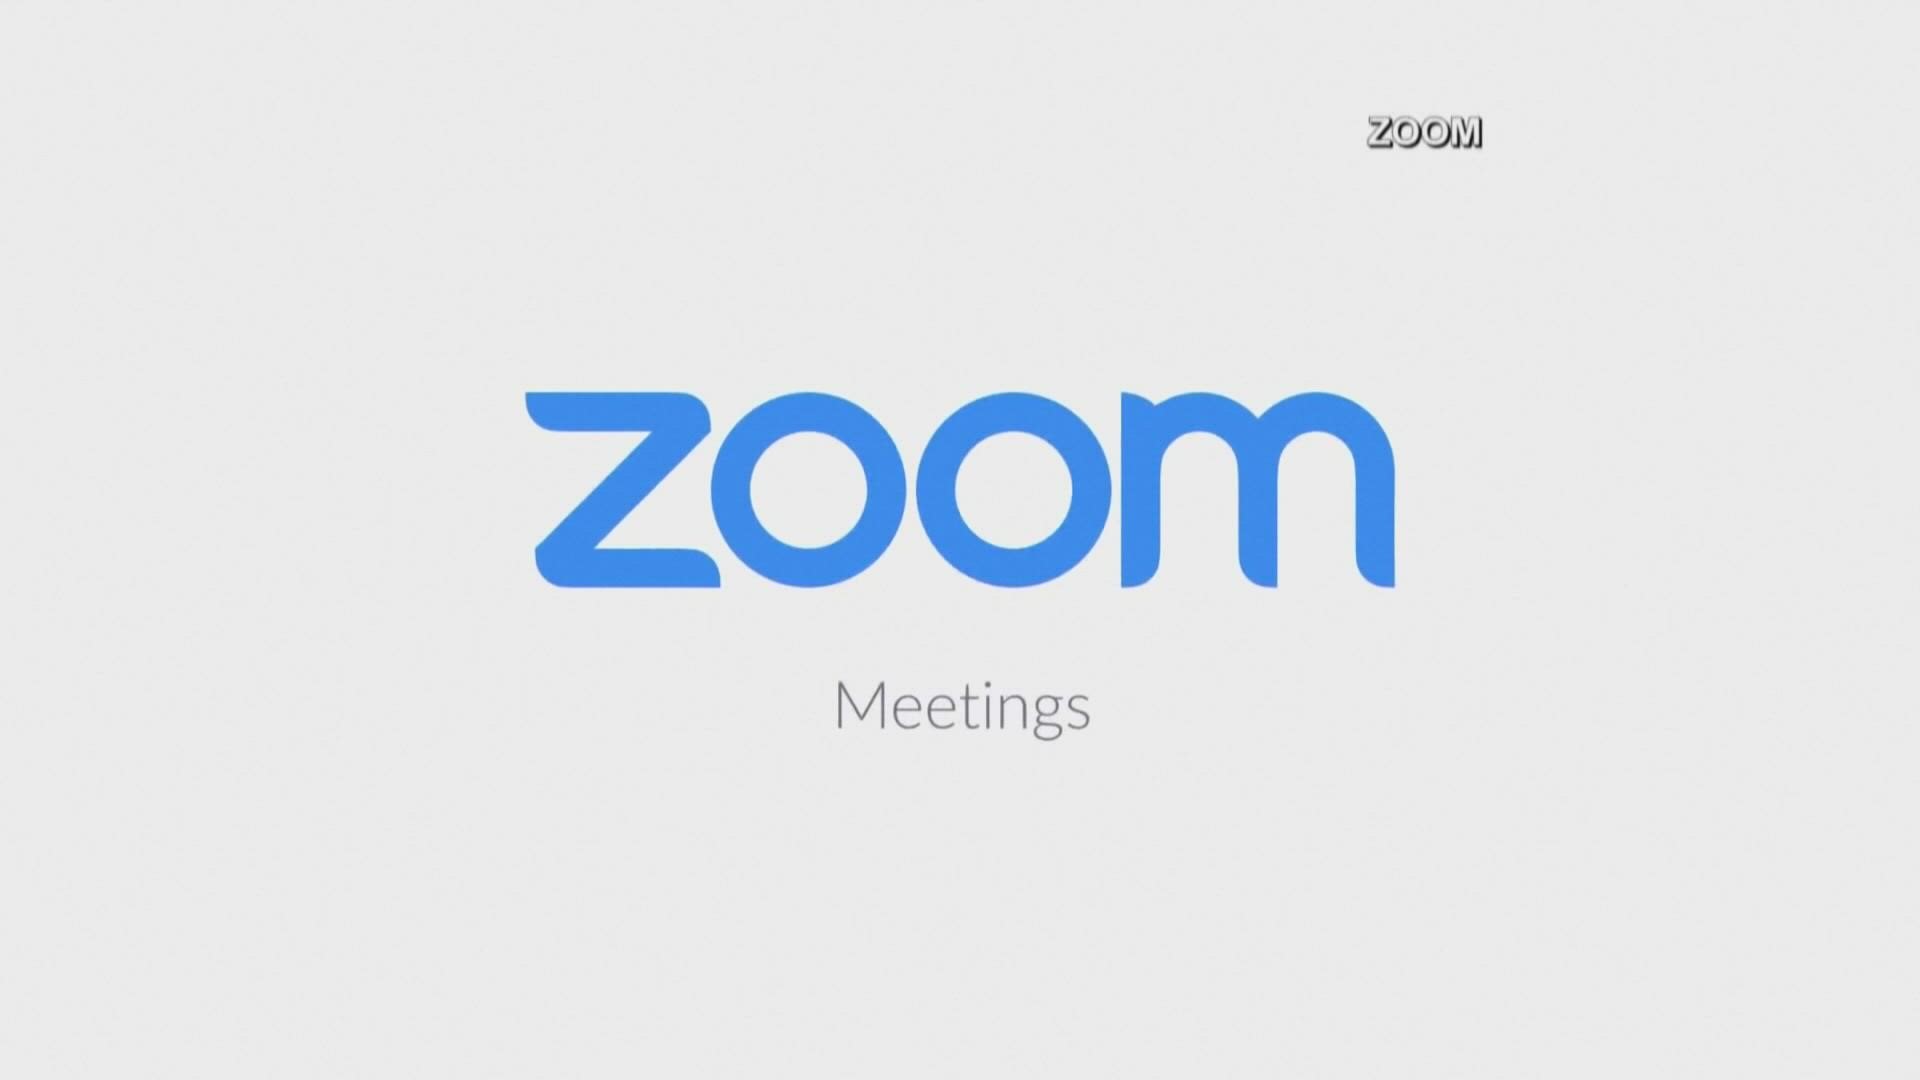 Video chat service Zoom has agreed to pay out $85 million in a settlement and you might be owed some money.